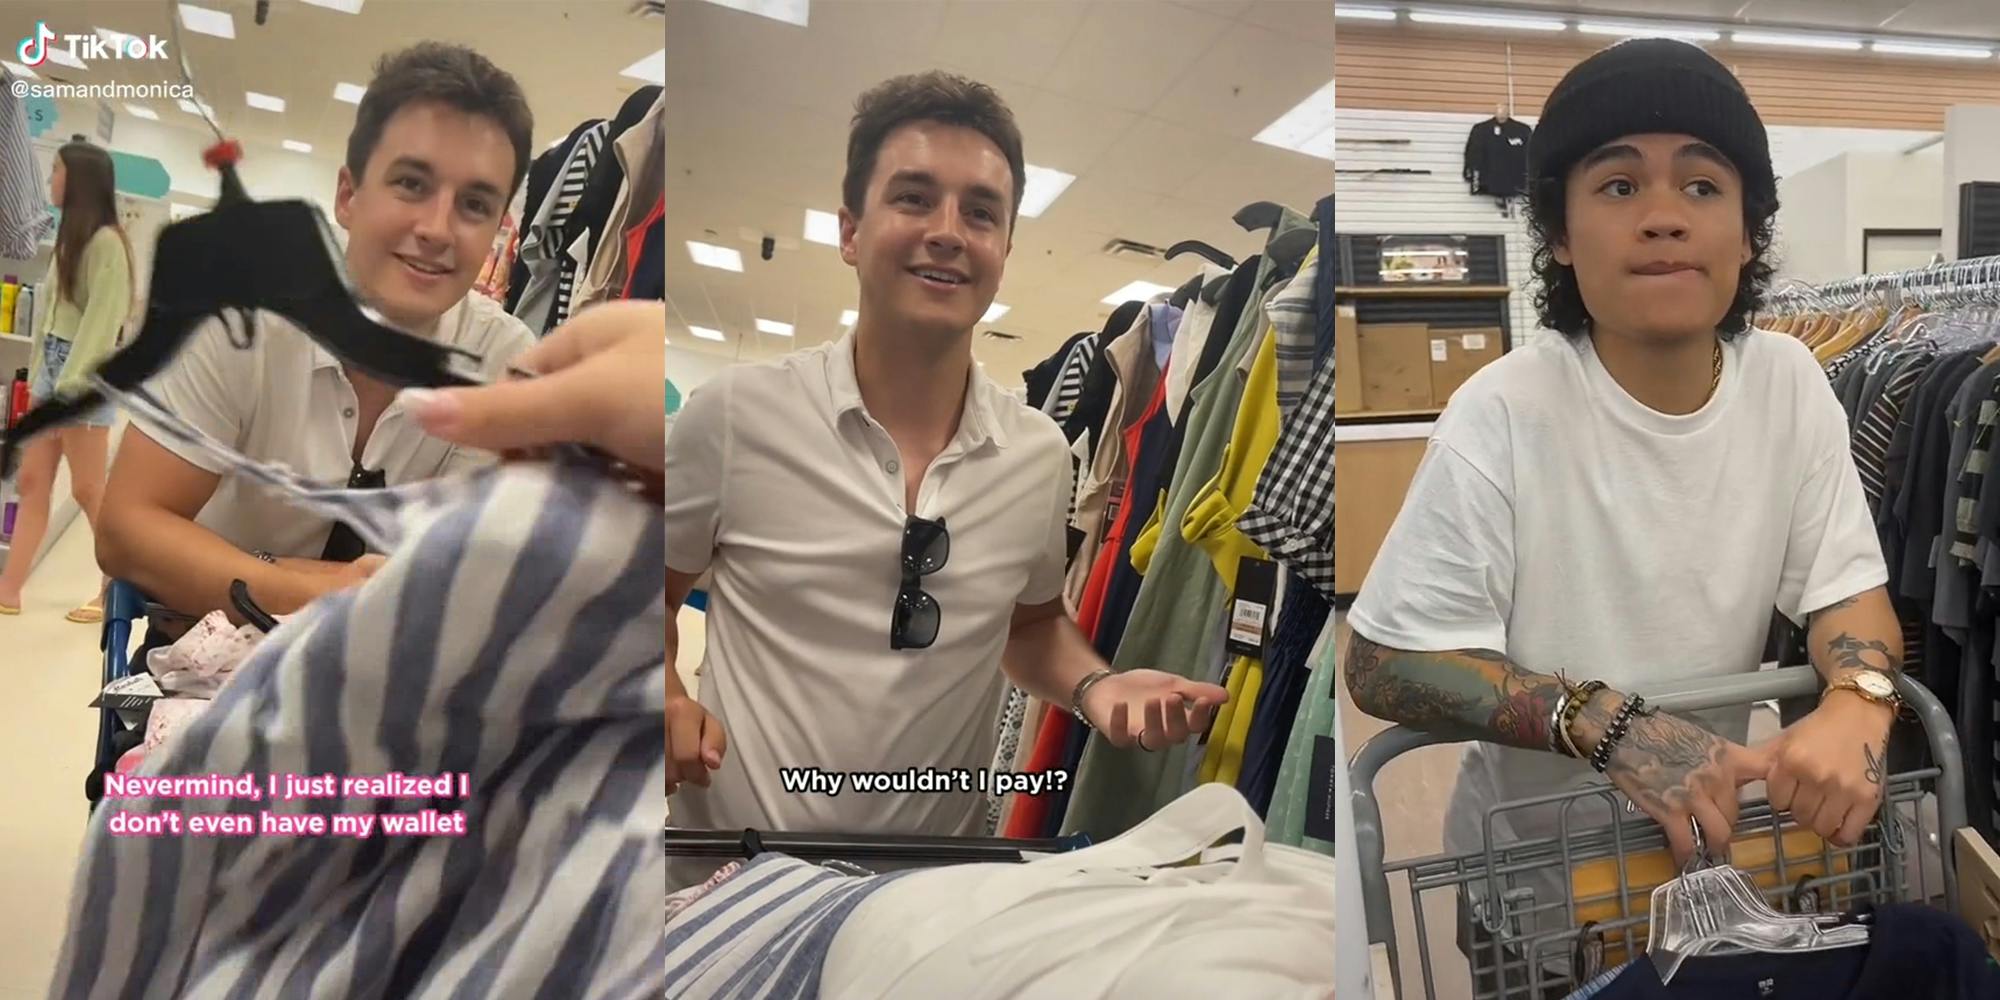 woman holding dress in front of man with shopping cart, caption "Nevermind, I just realized I don't even have my wallet" (l) man shrugging with caption "why wouldn't I pay?!" (c) young man biting lip with shopping cart (r)